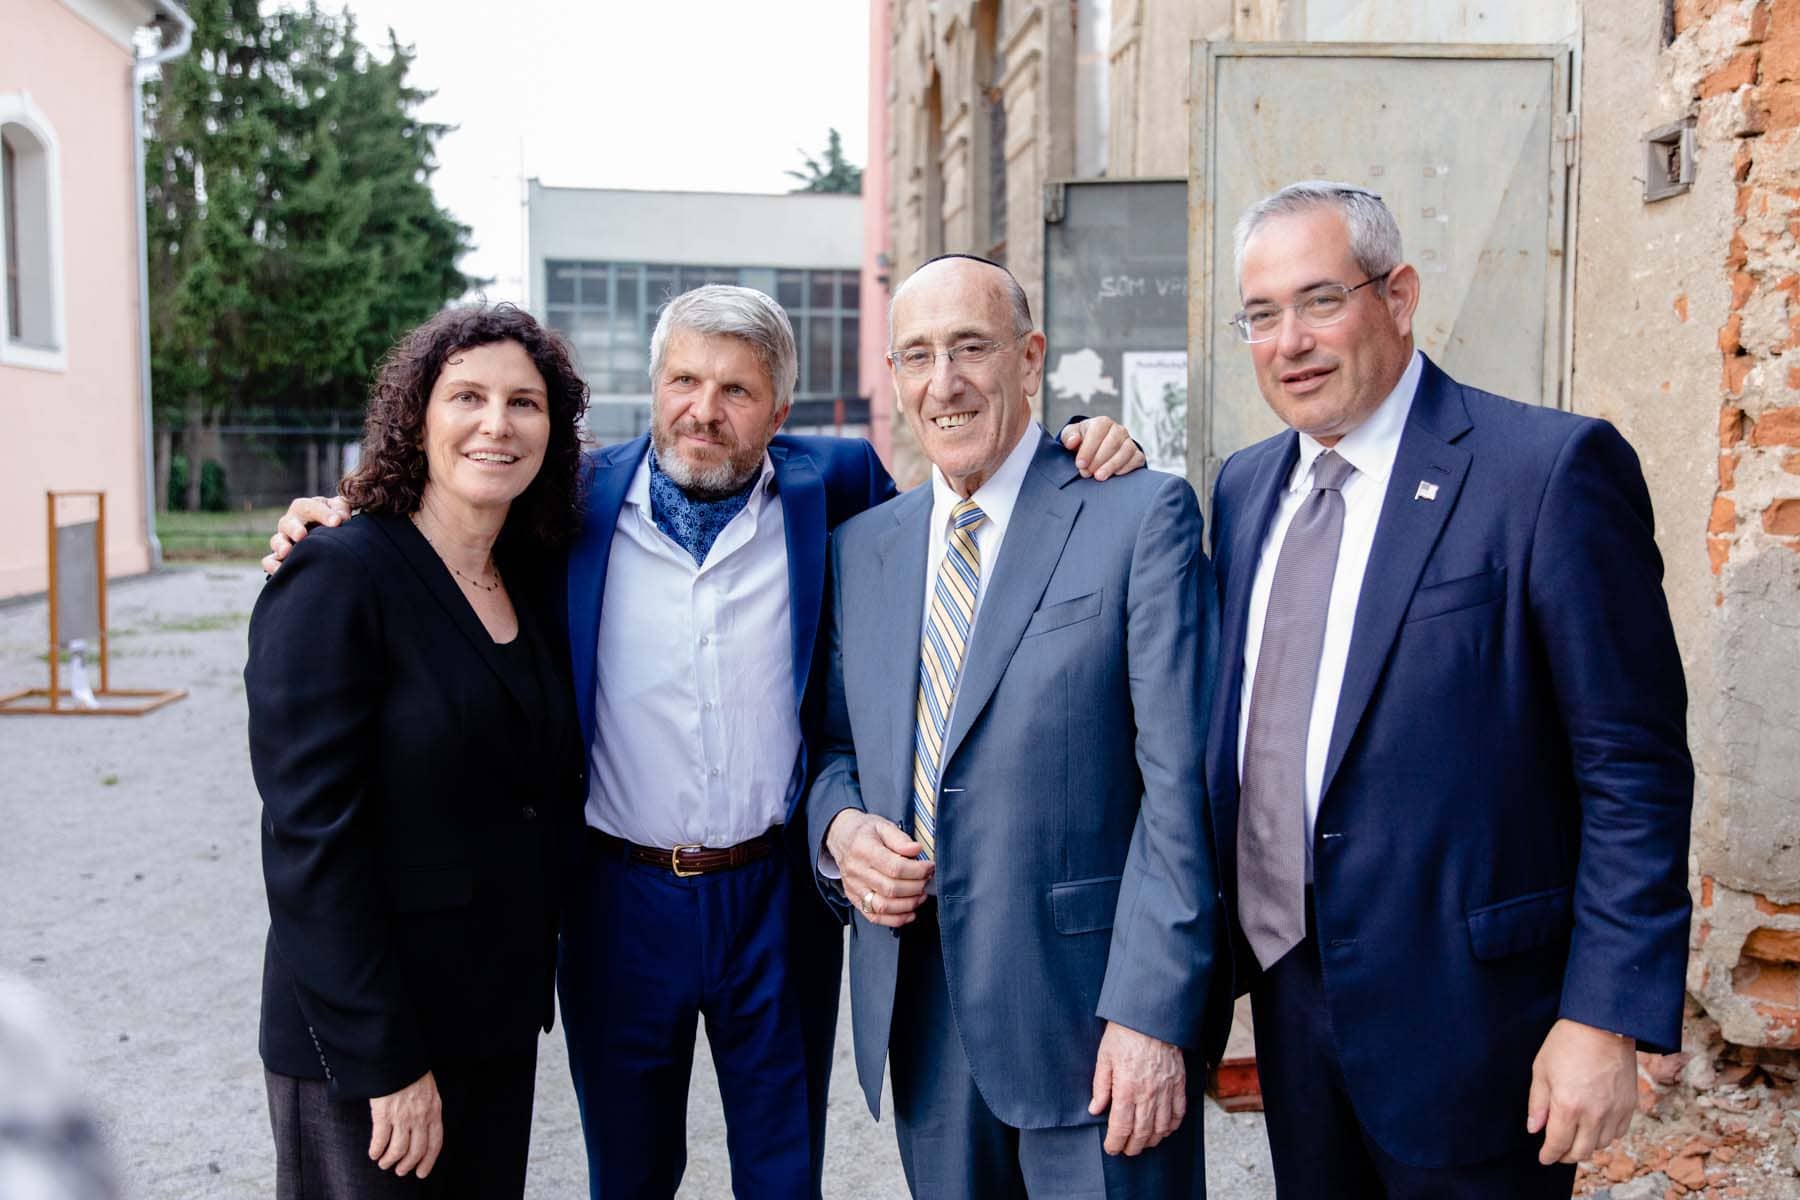 From left: Ms. Orit Stieglitz, Mr. Peter Absolon, Mr. Emil Fish, and Mr. Paul Packer outside the Old Synagogue after the event